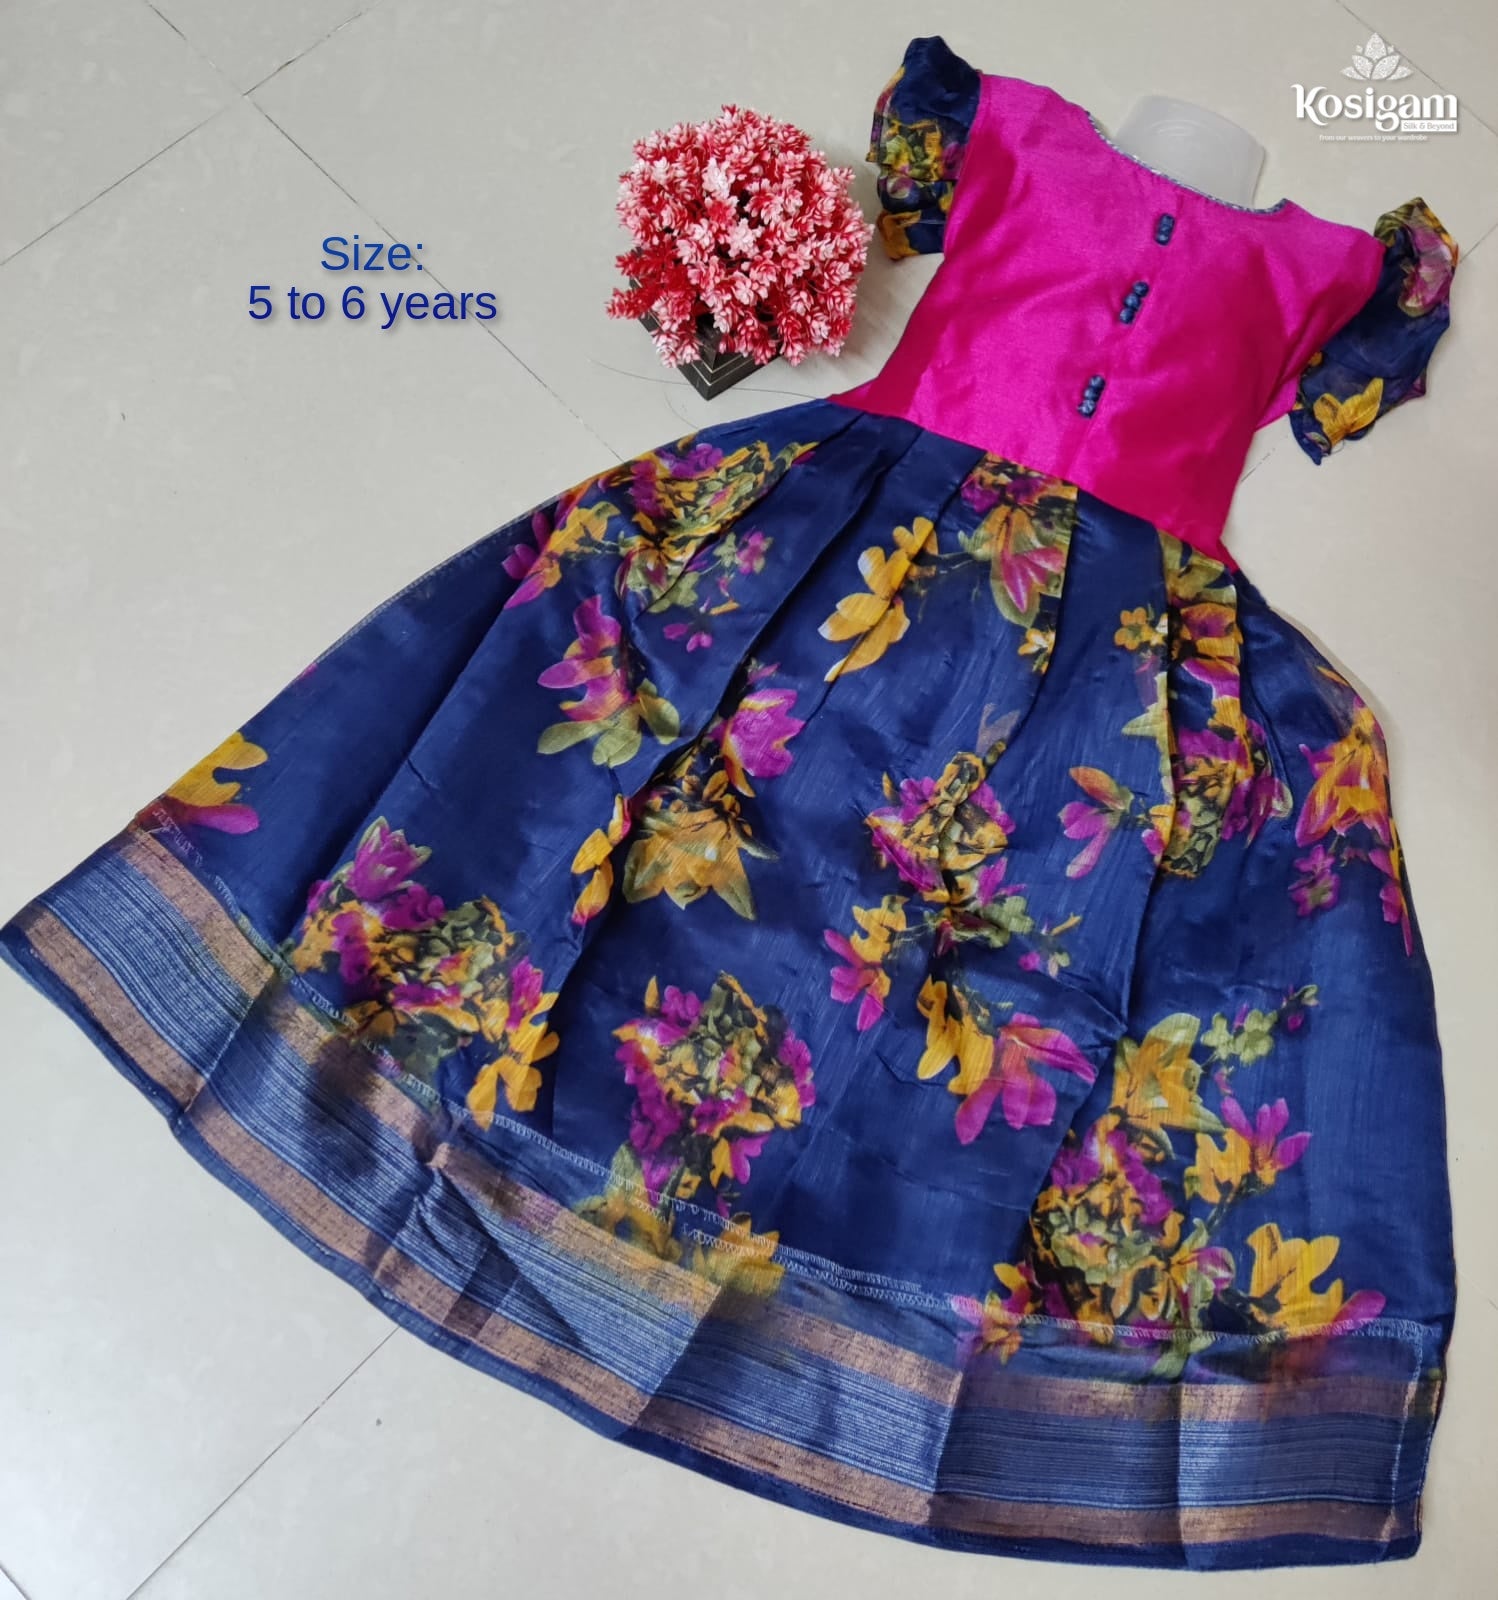 Discover more than 126 full frock designs for kids